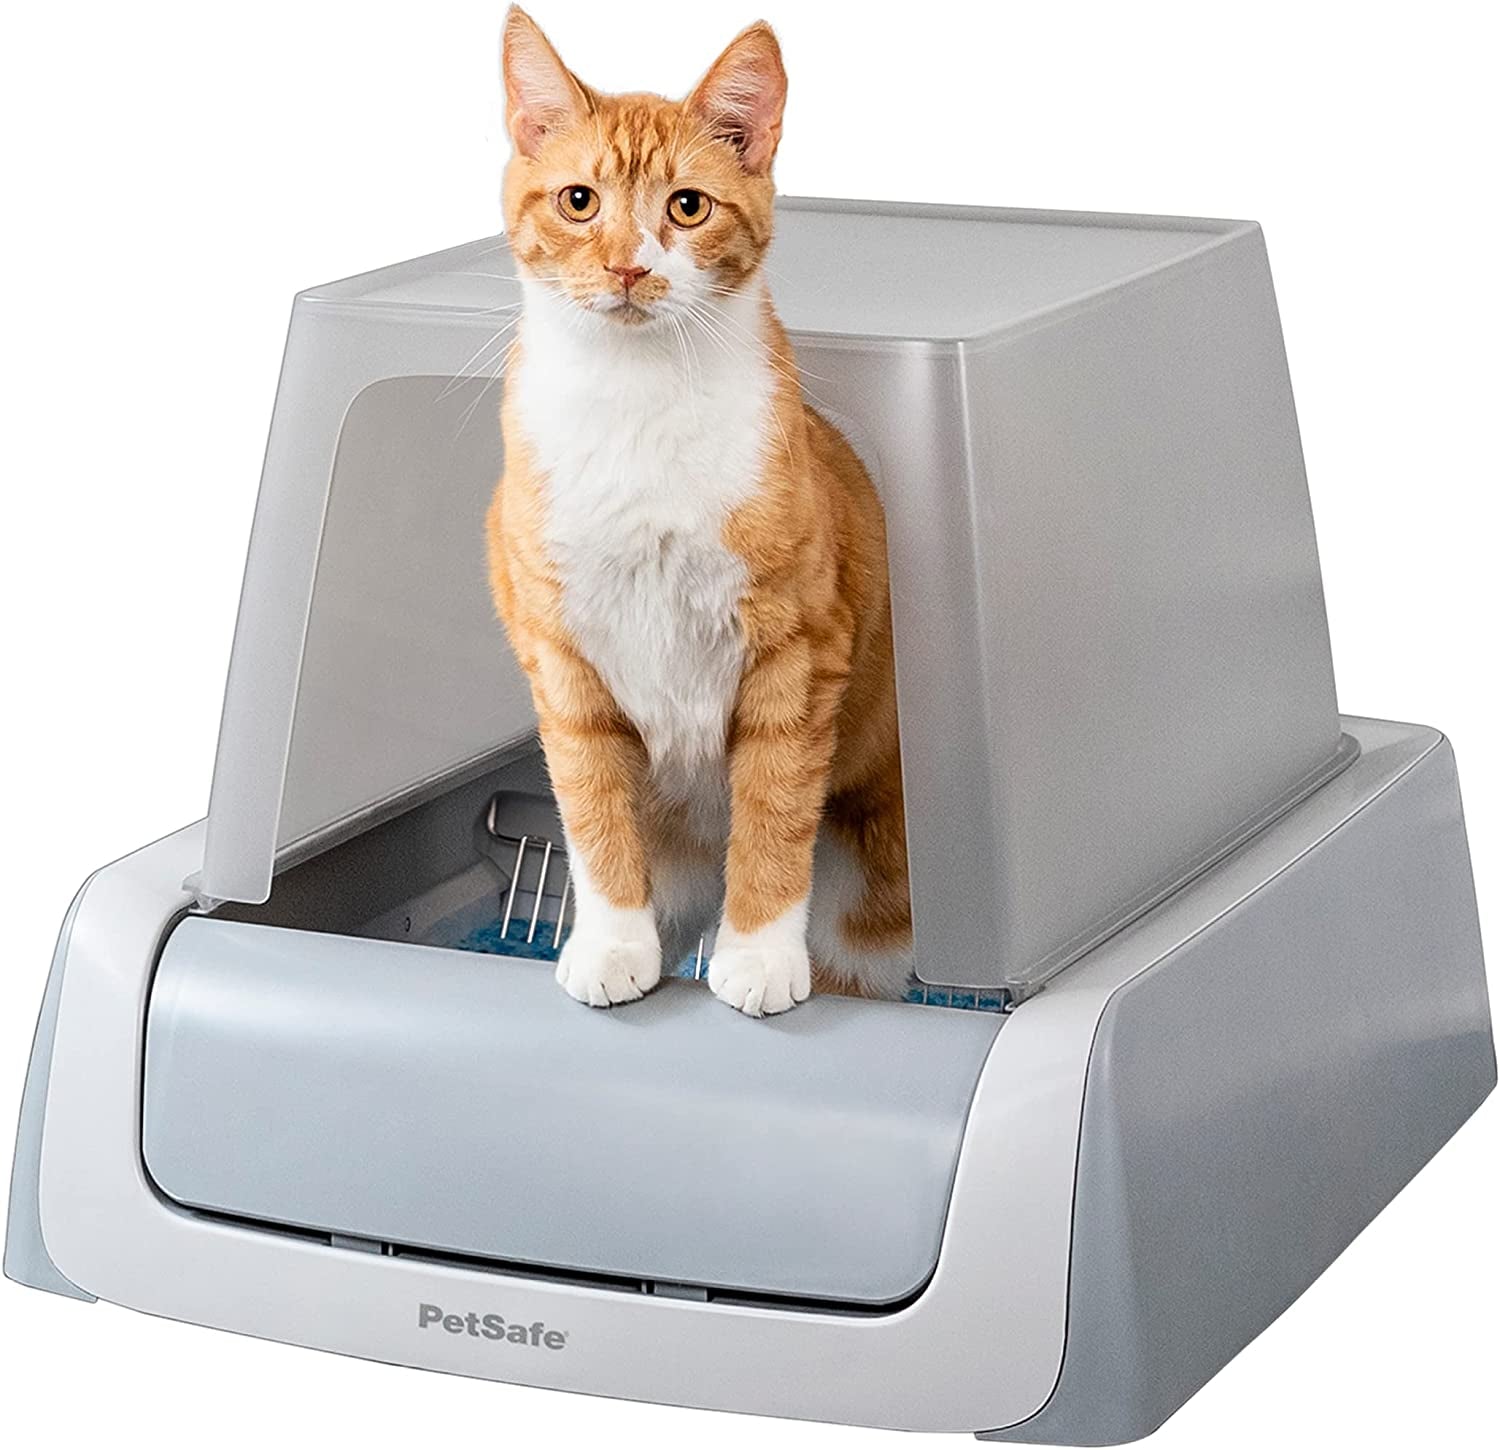 Petsafe Scoopfree Self-Cleaning Cat Litter Box - Never Scoop Litter Again - Hands-Free Cleanup with Disposable Crystal Tray - Less Tracking, Better Odor Control - Includes Hood & Disposable Tray